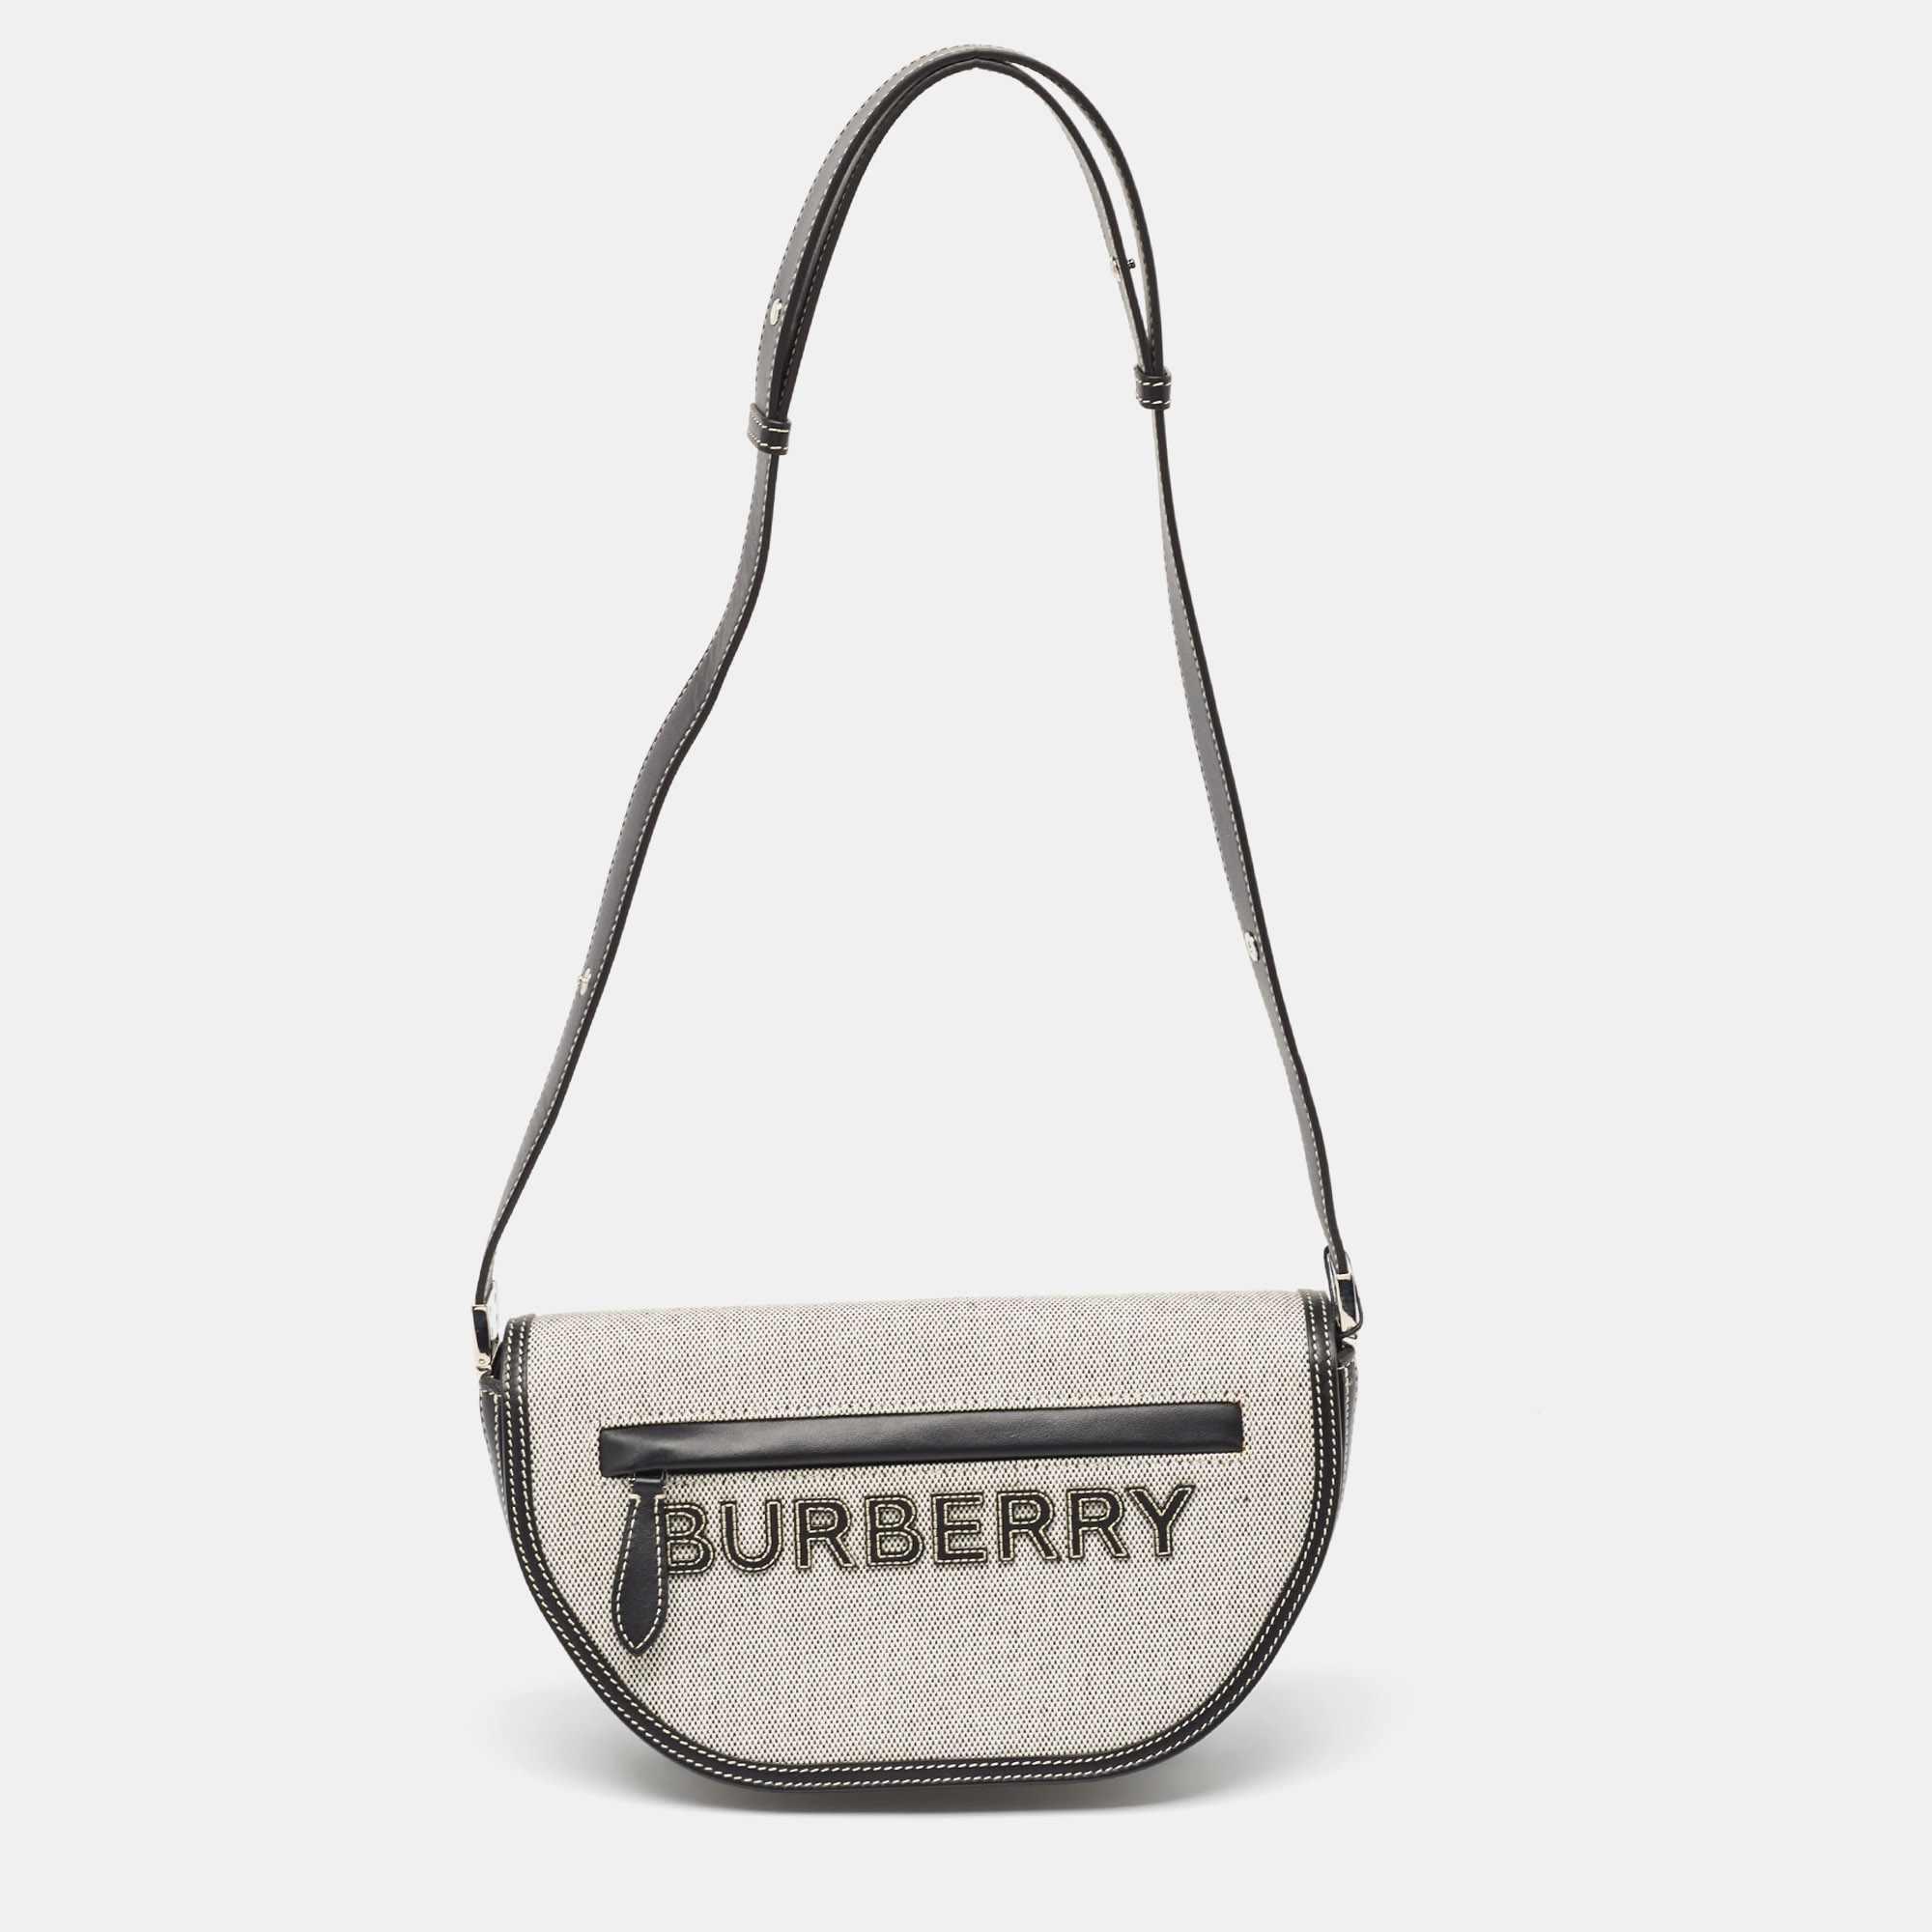 Get style and carry your essentials with ease using this Burberry shoulder bag. It has been crafted using high quality materials to be a standout accessory.